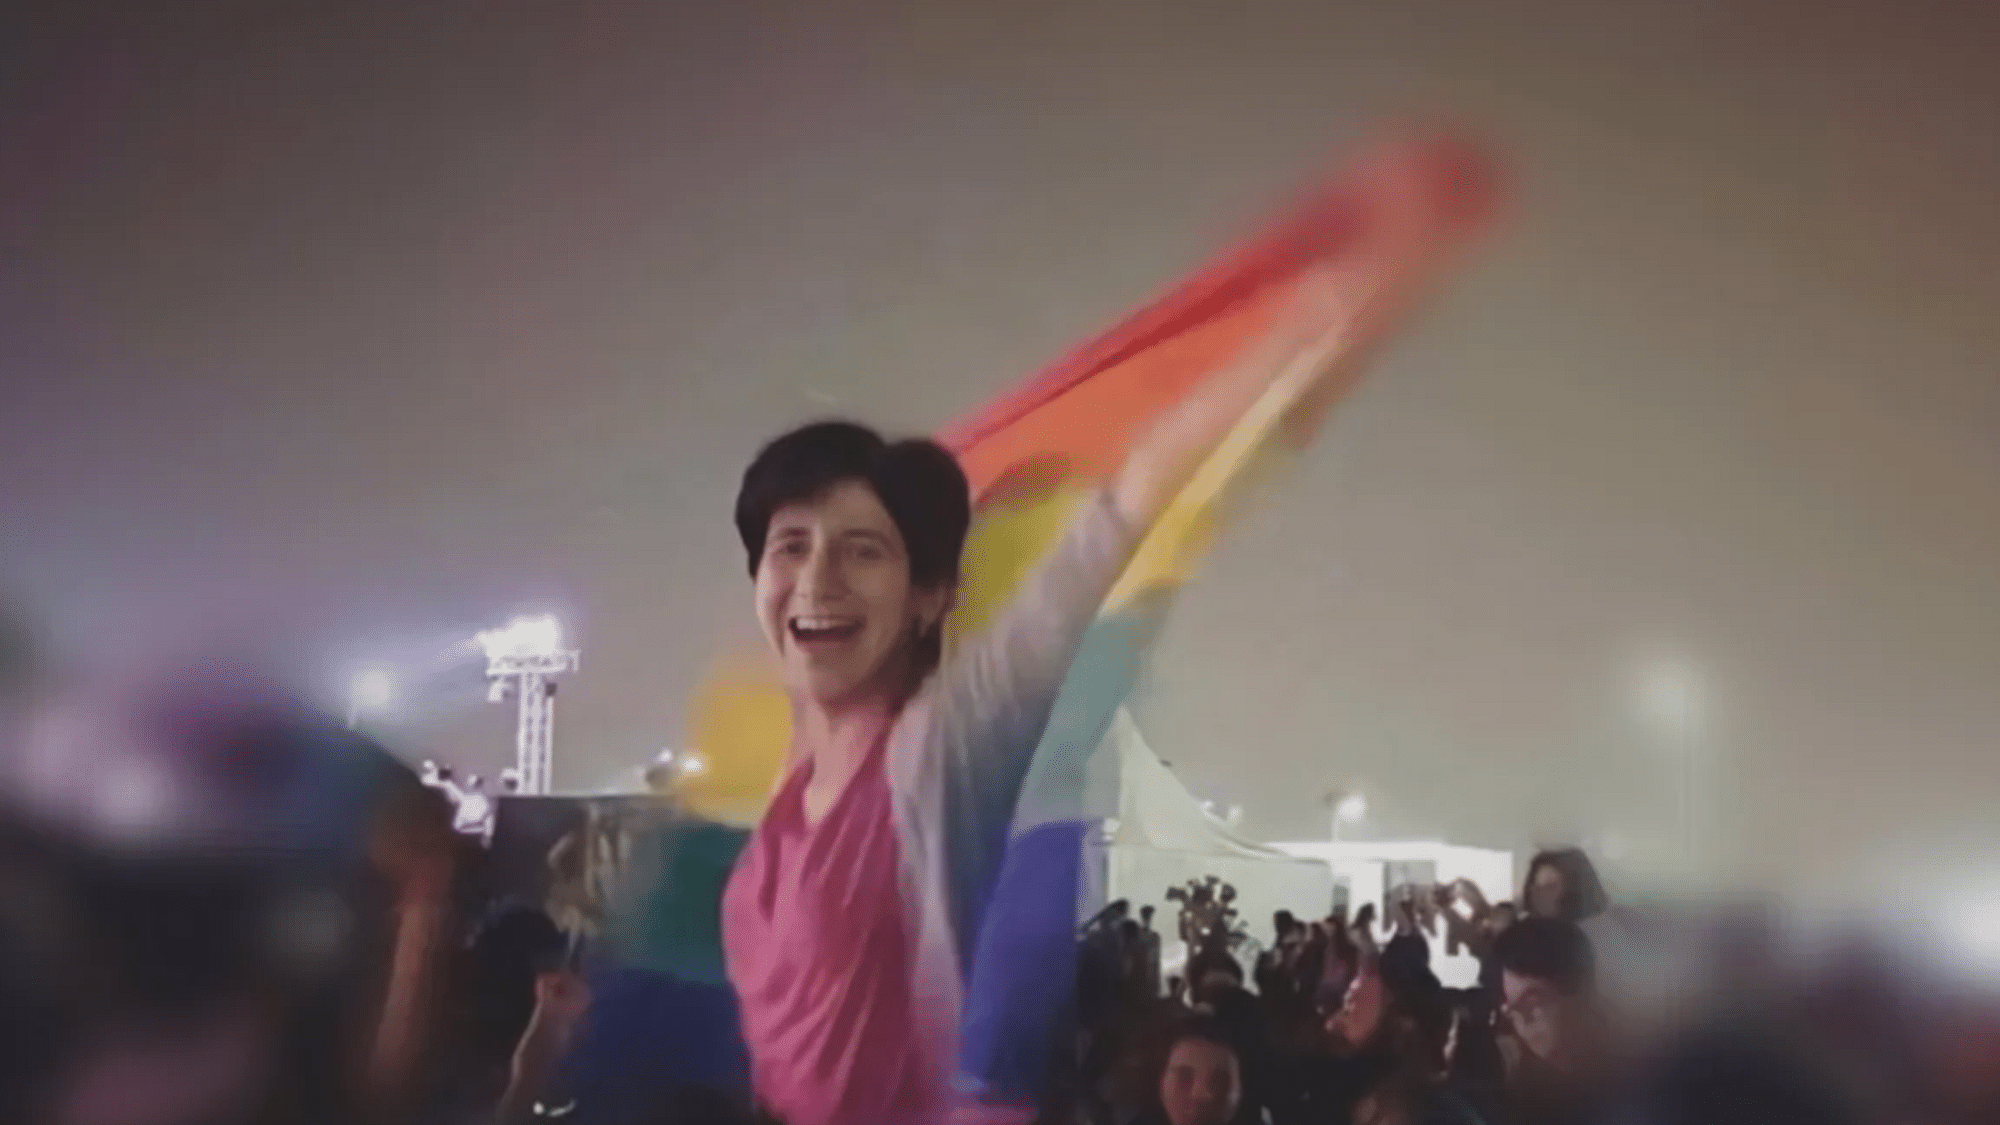 Sarah Hegazi was arrested in 2017 for waving the rainbow flag at a concert in Cairo.